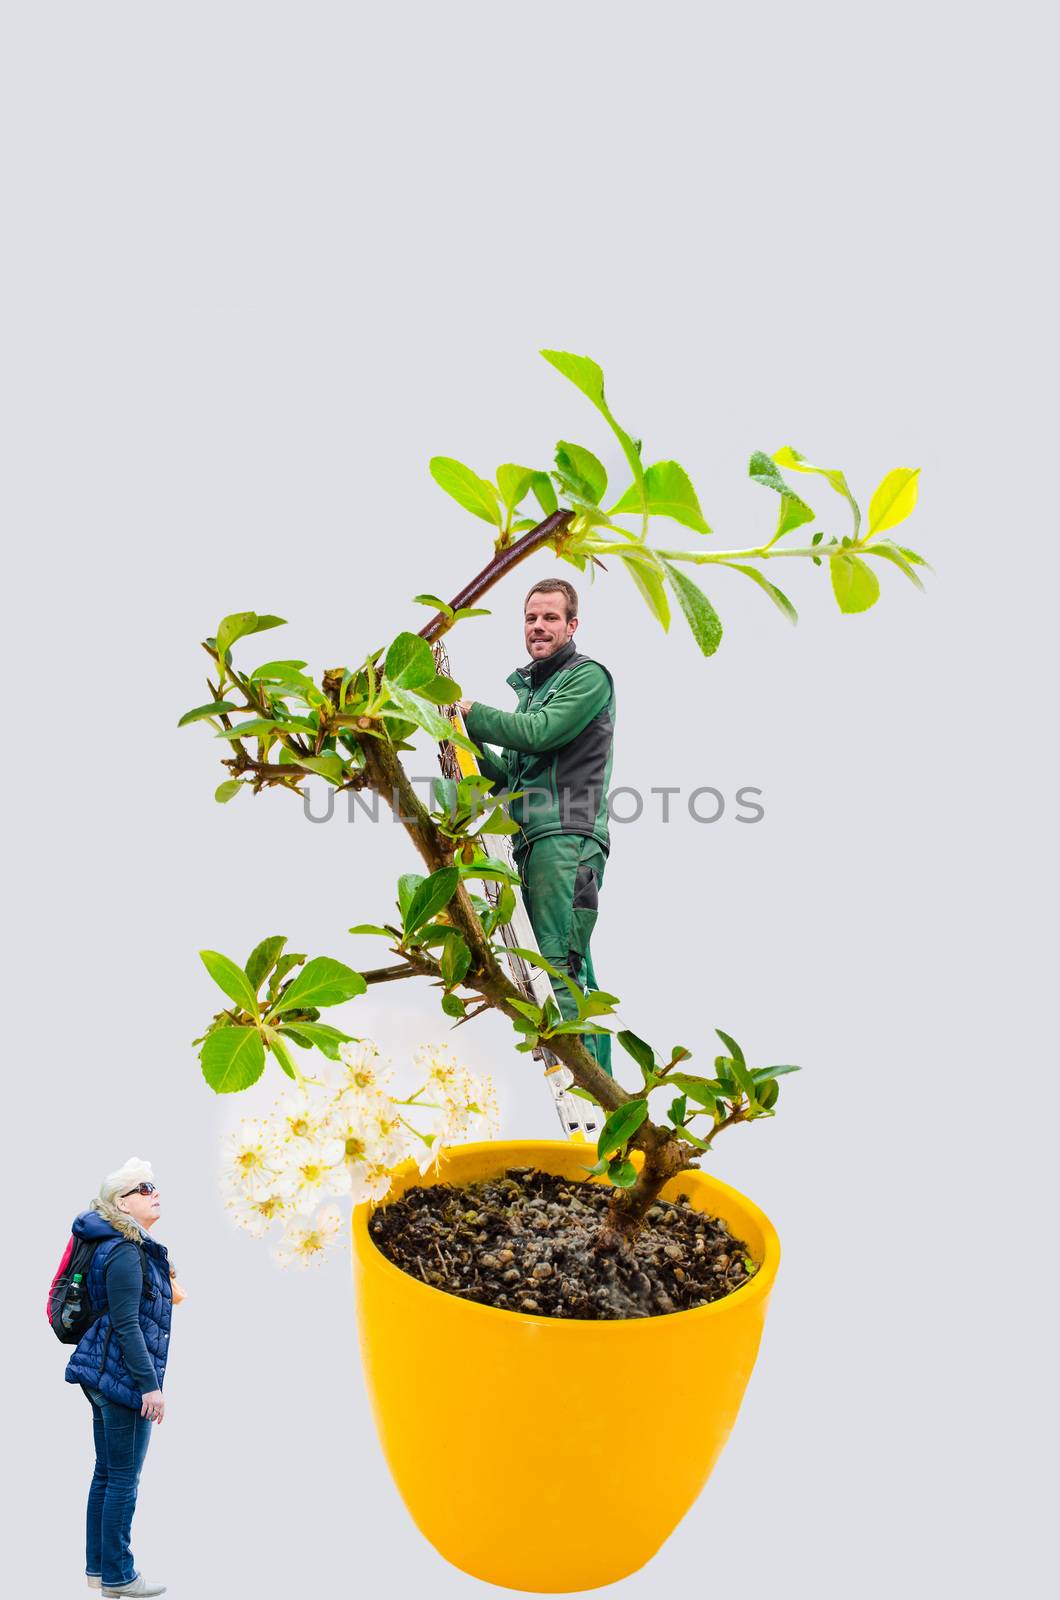 Abstract, woman and man with bonsai tree. A small bonsai tree in a yellow ceramic pot. Isolated on white background.